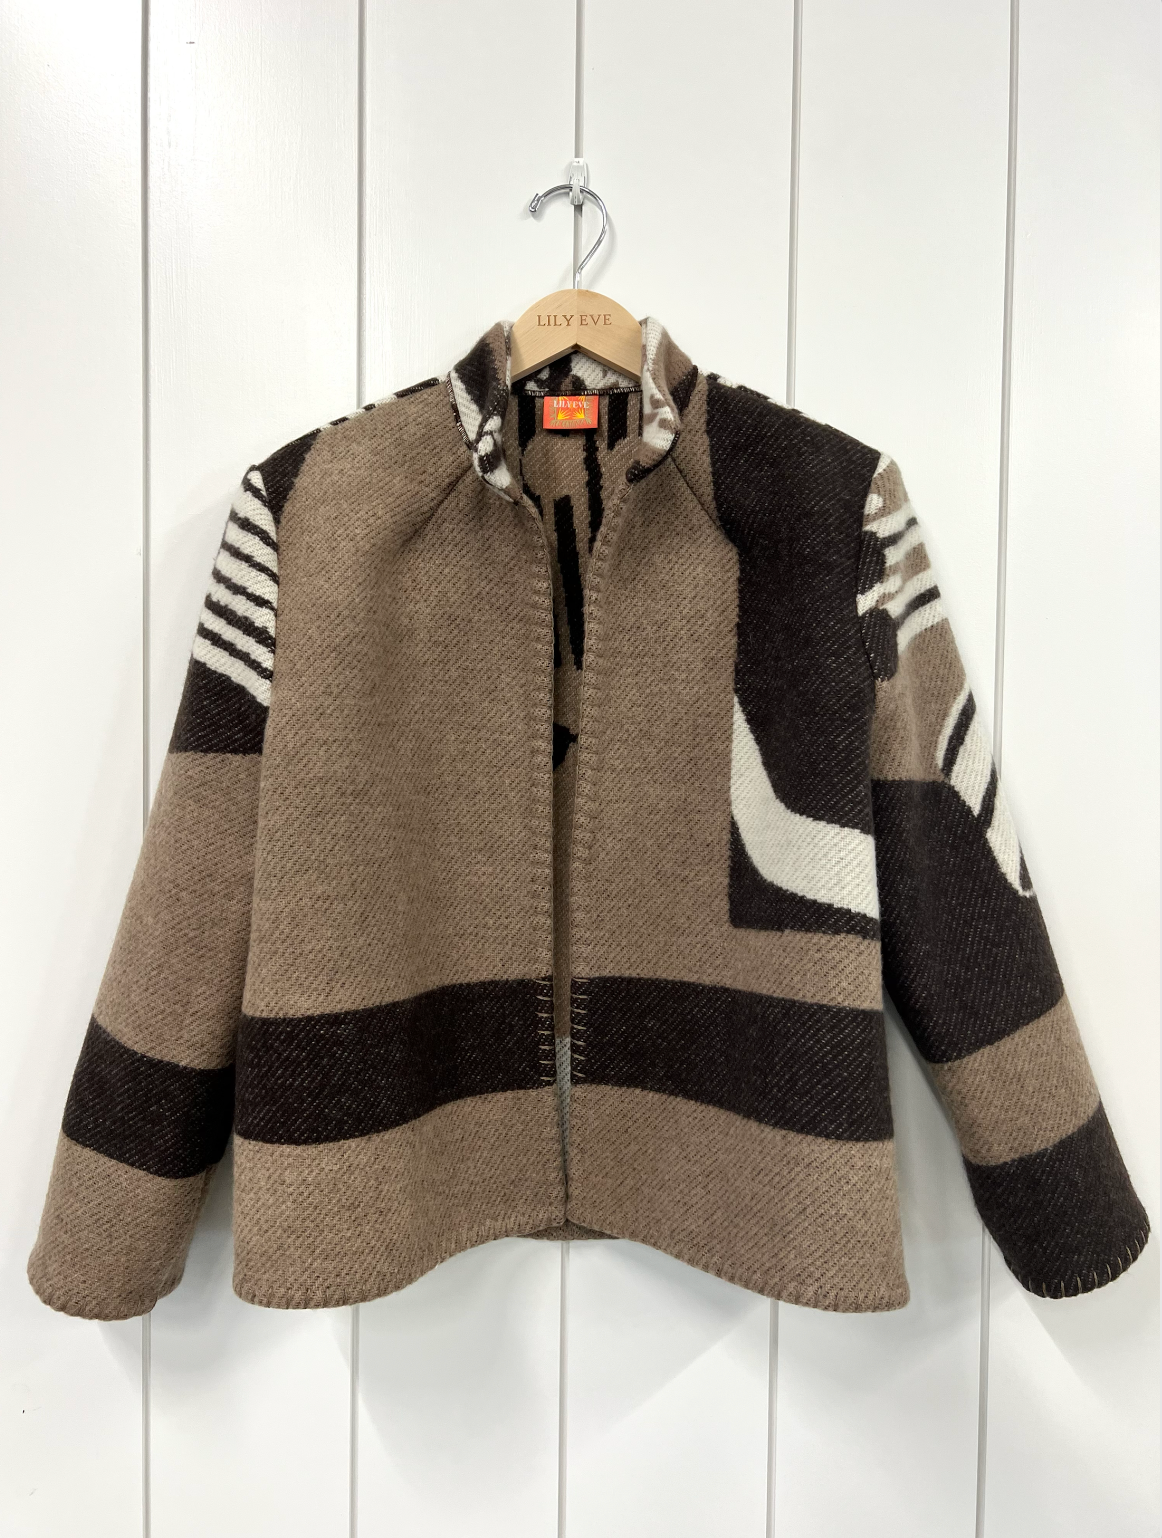 The Brown Detailed Jacket